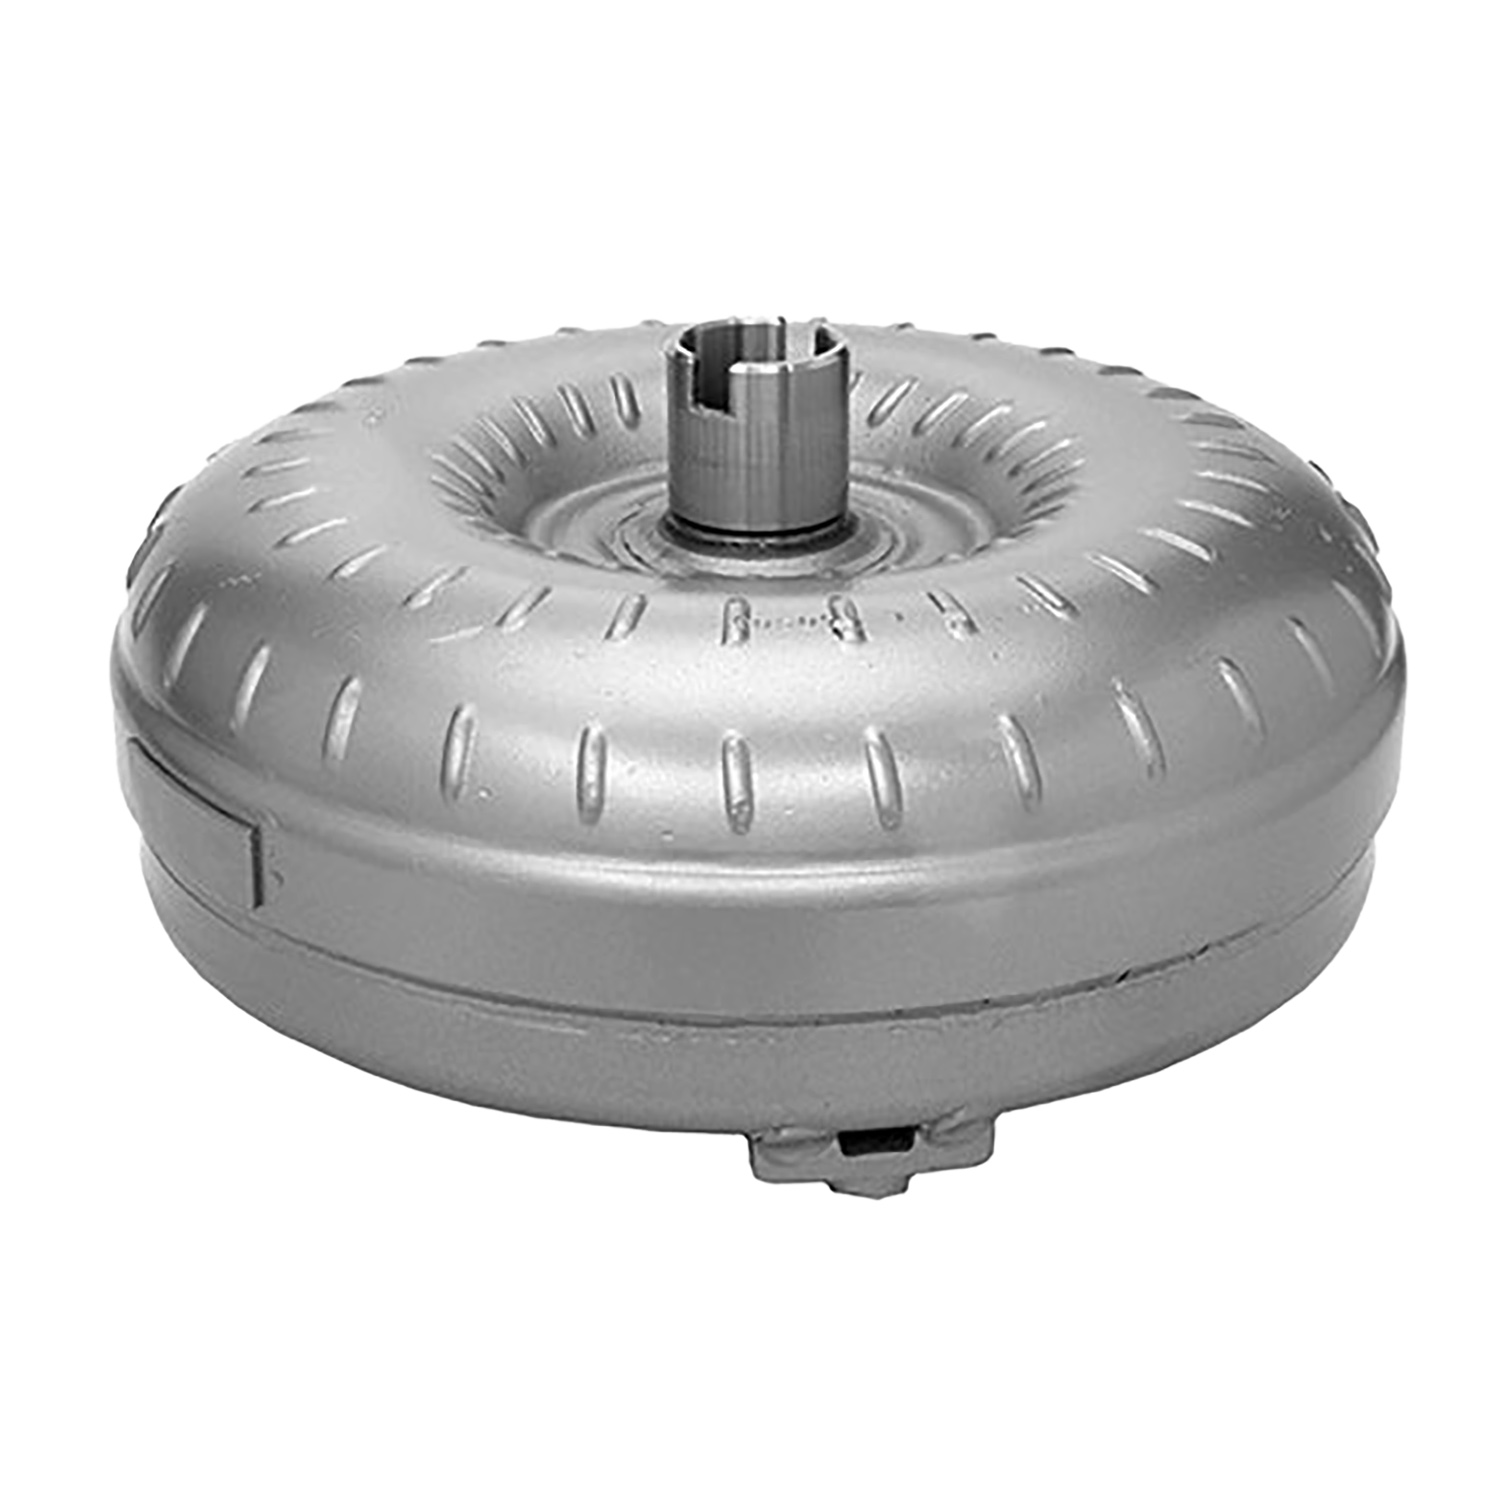 Remanufactured Automatic Transmission Torque Converter for GM TH200/325, 700 No Cltch